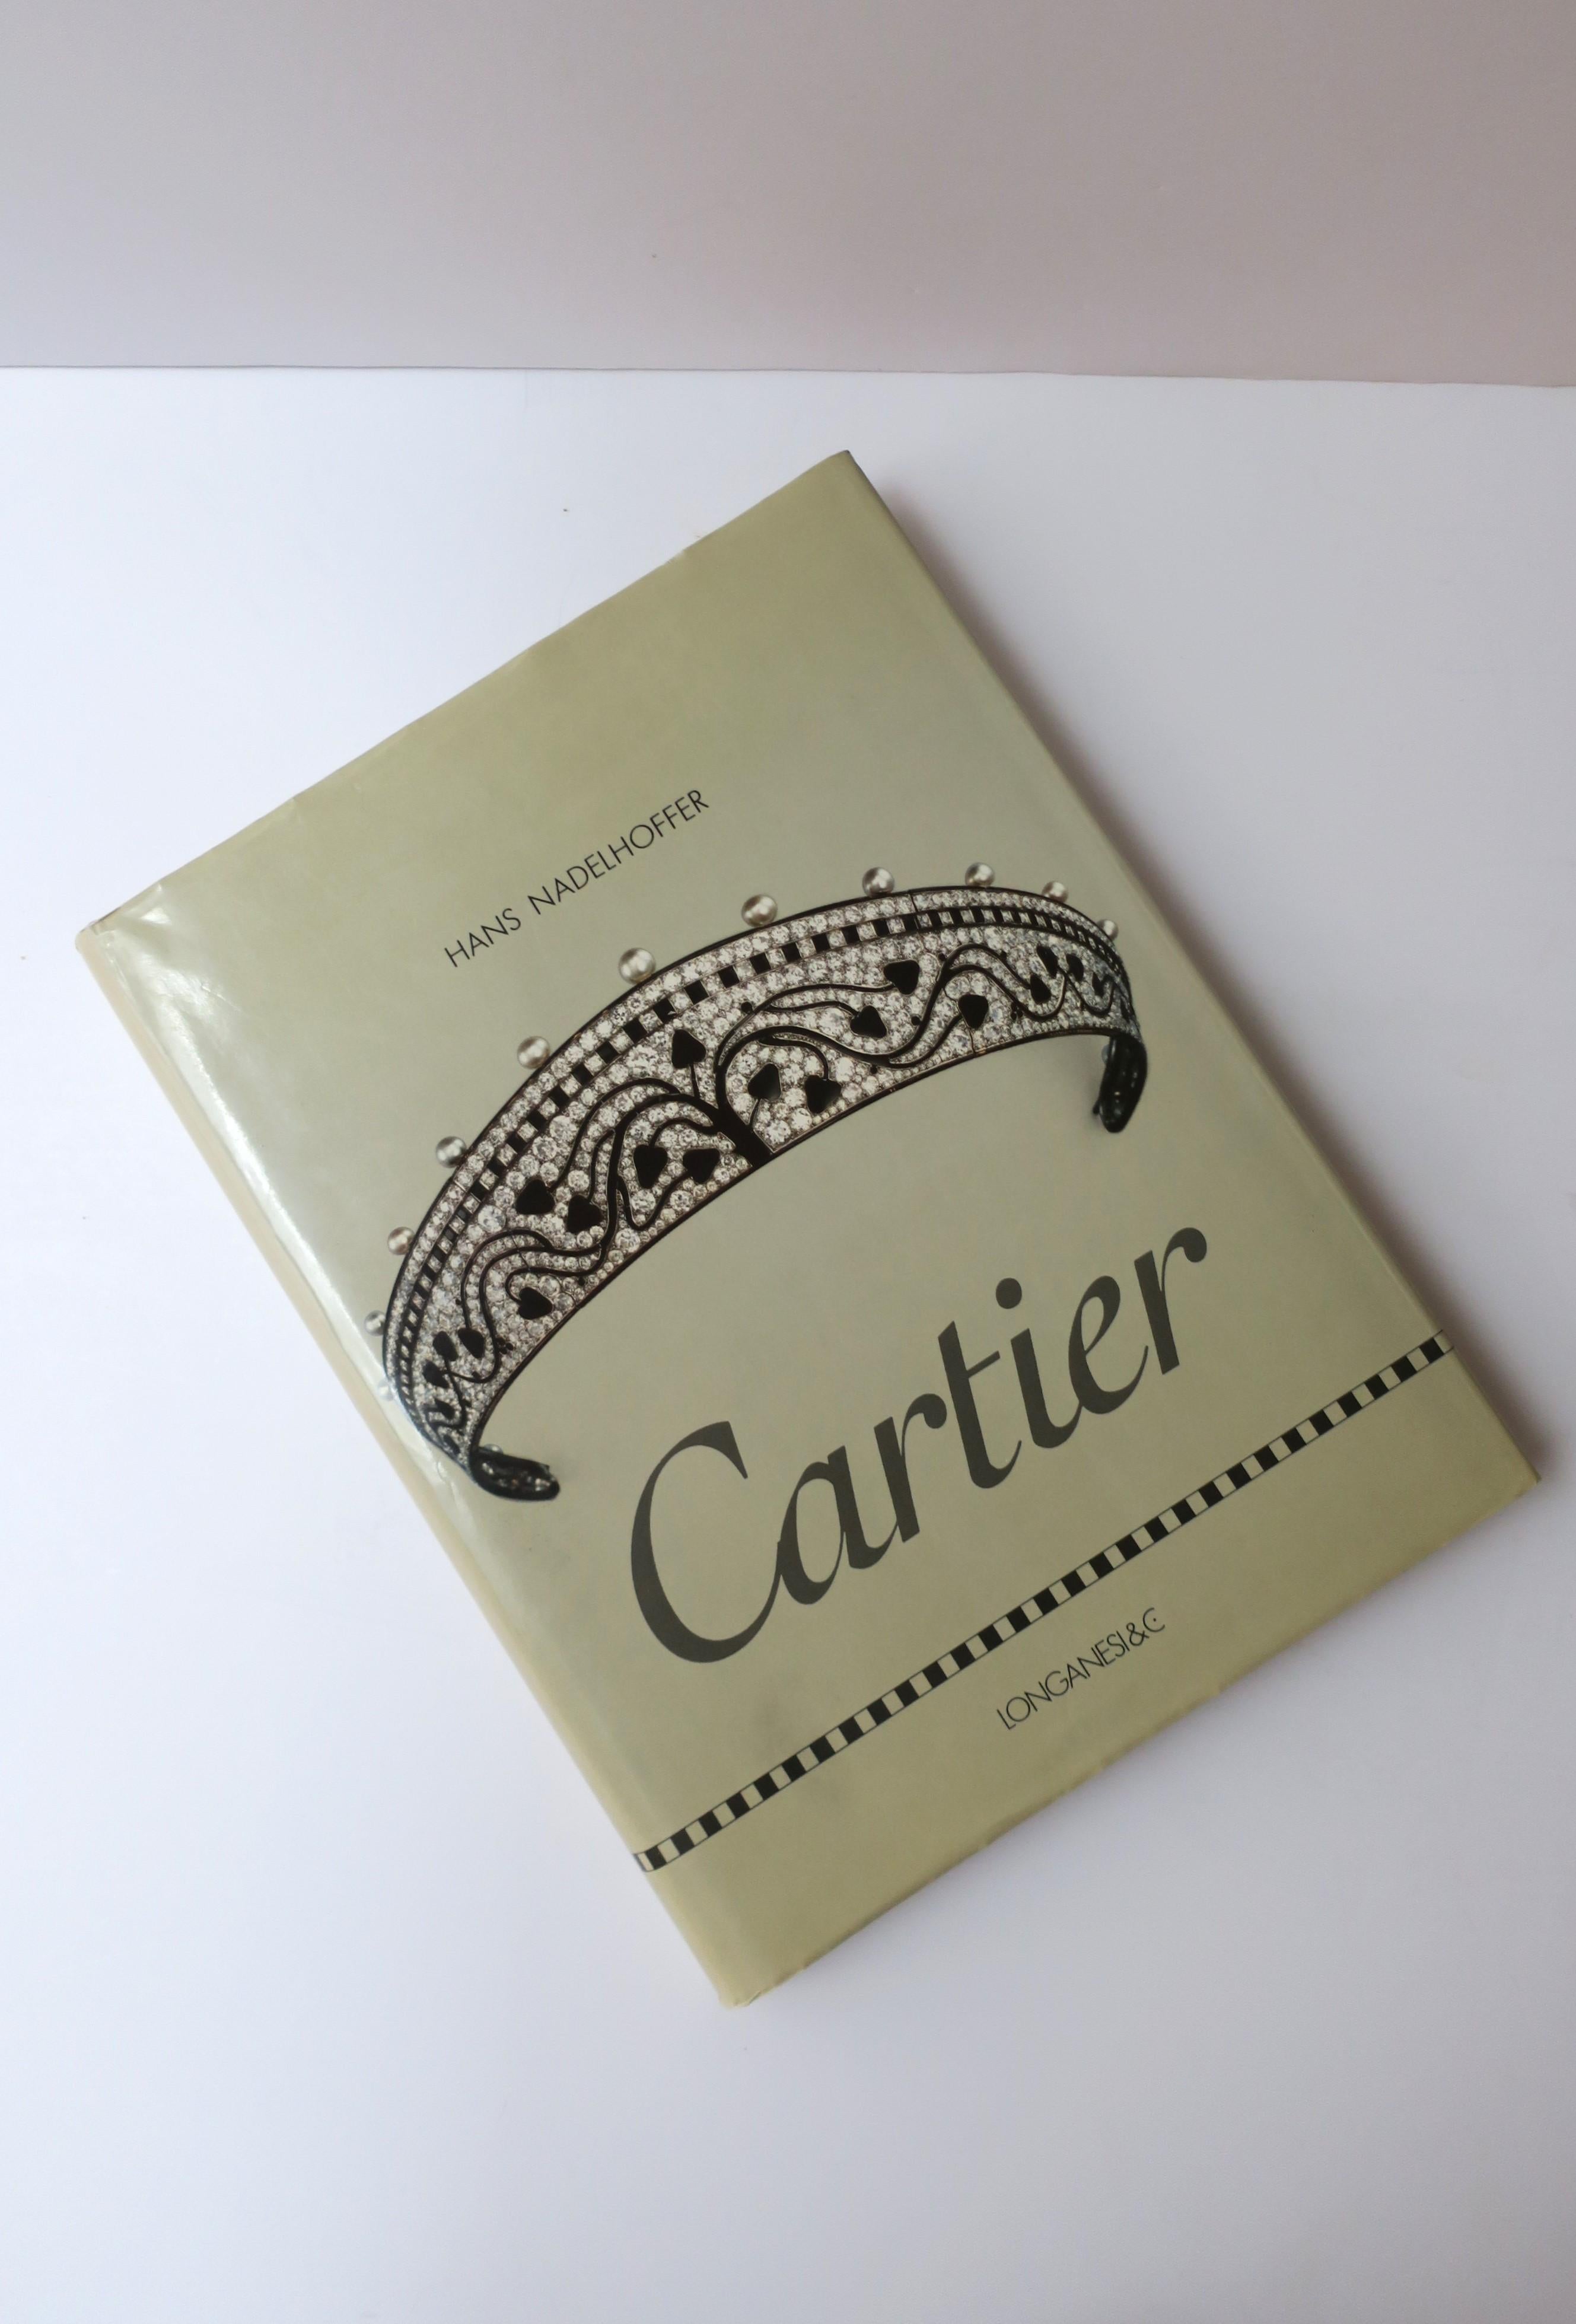 Cartier High Jewelry Coffee Table Book by Hans Nadelhoffer, Italian Version In Good Condition For Sale In New York, NY